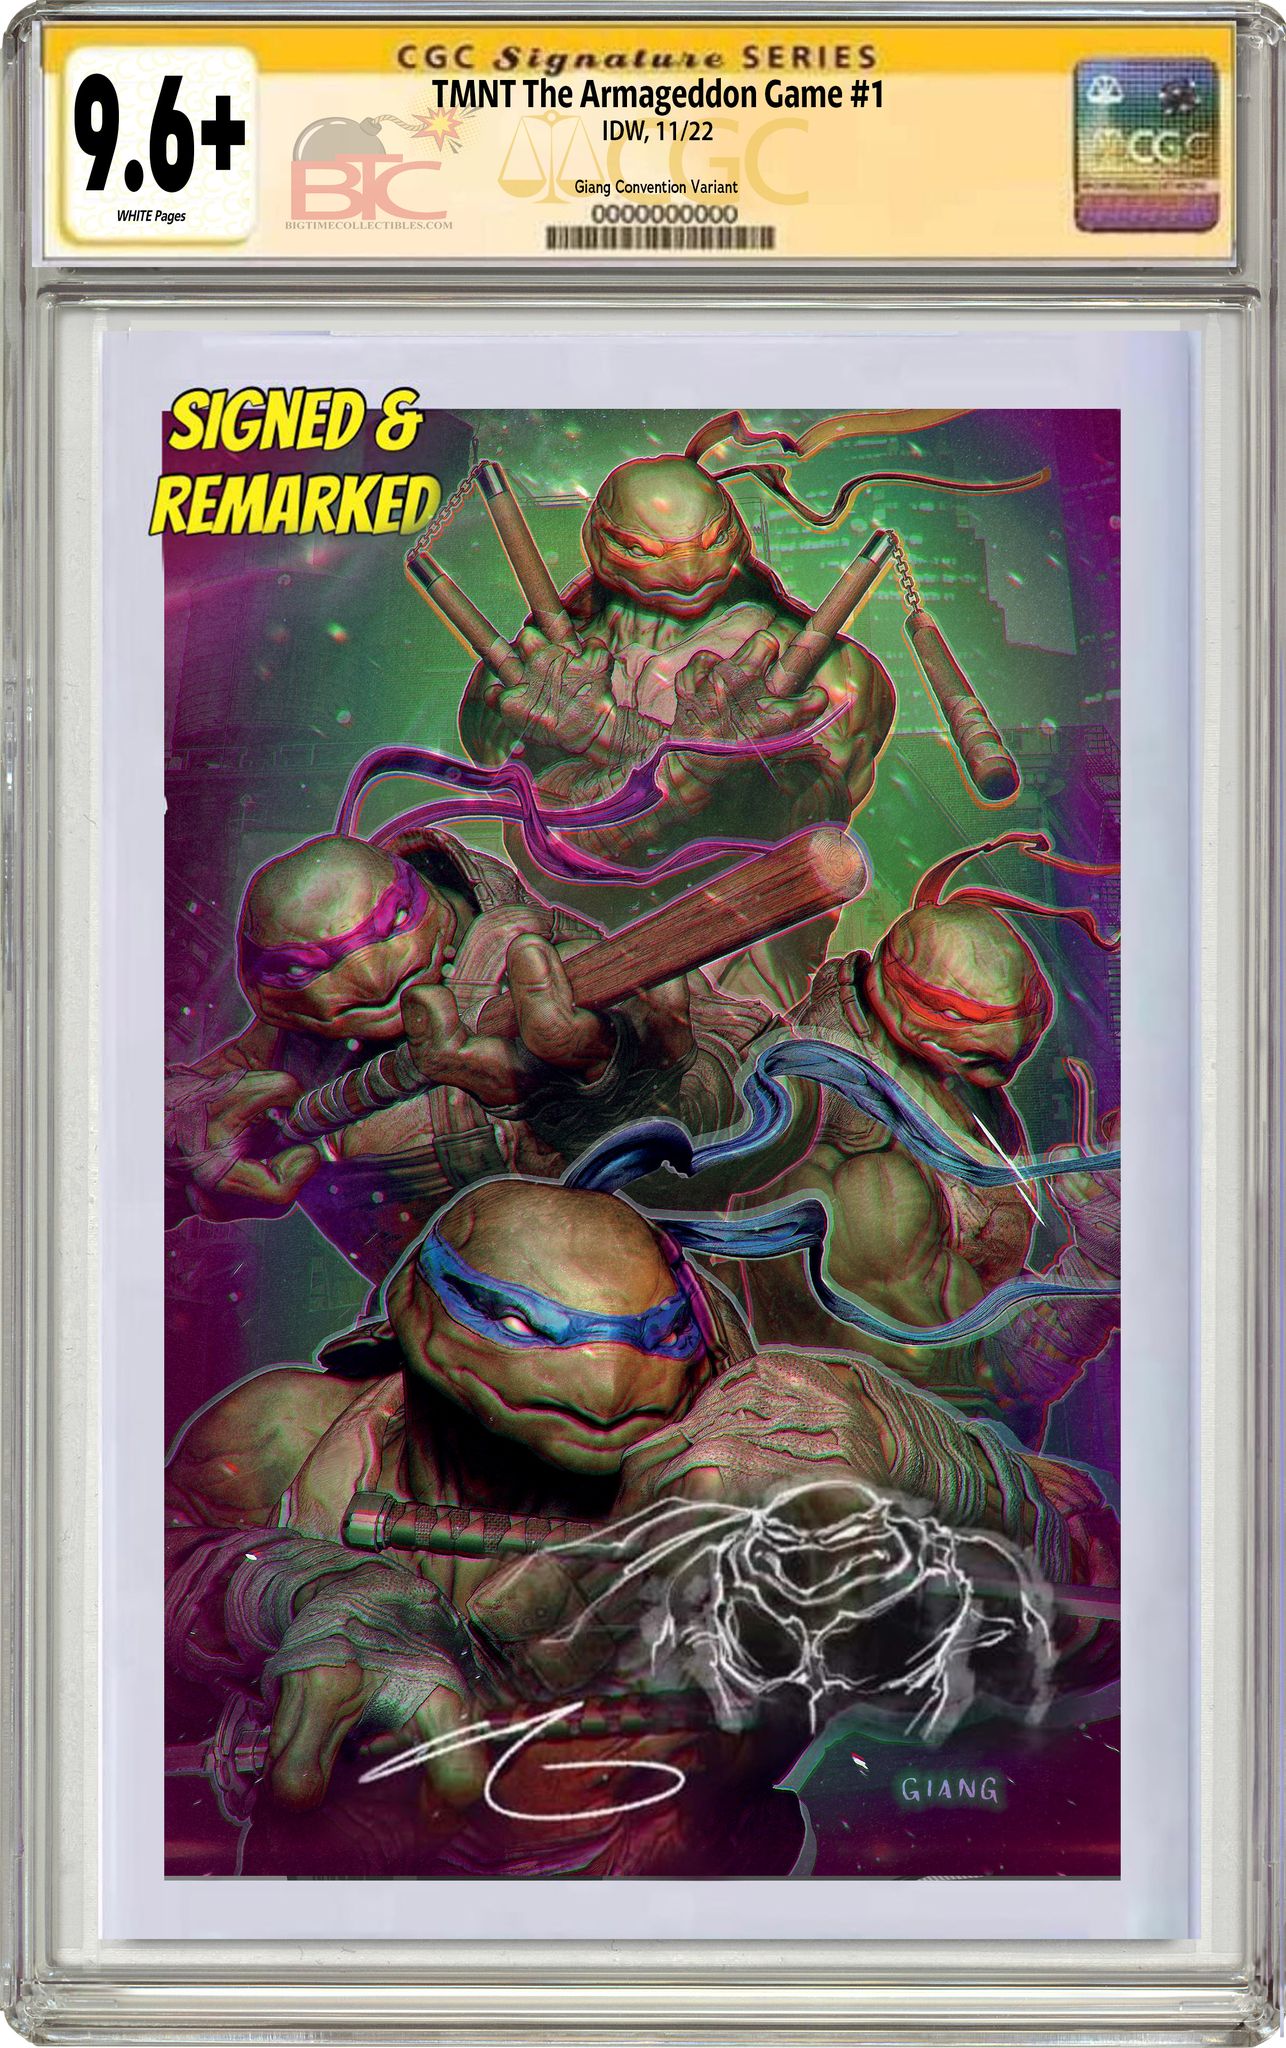 09/28/2022 TMNT ARMAGEDDON GAME #1 JOHN GIANG CONVENTION EXCLUSIVE VIRGIN VARIANT OPTIONS